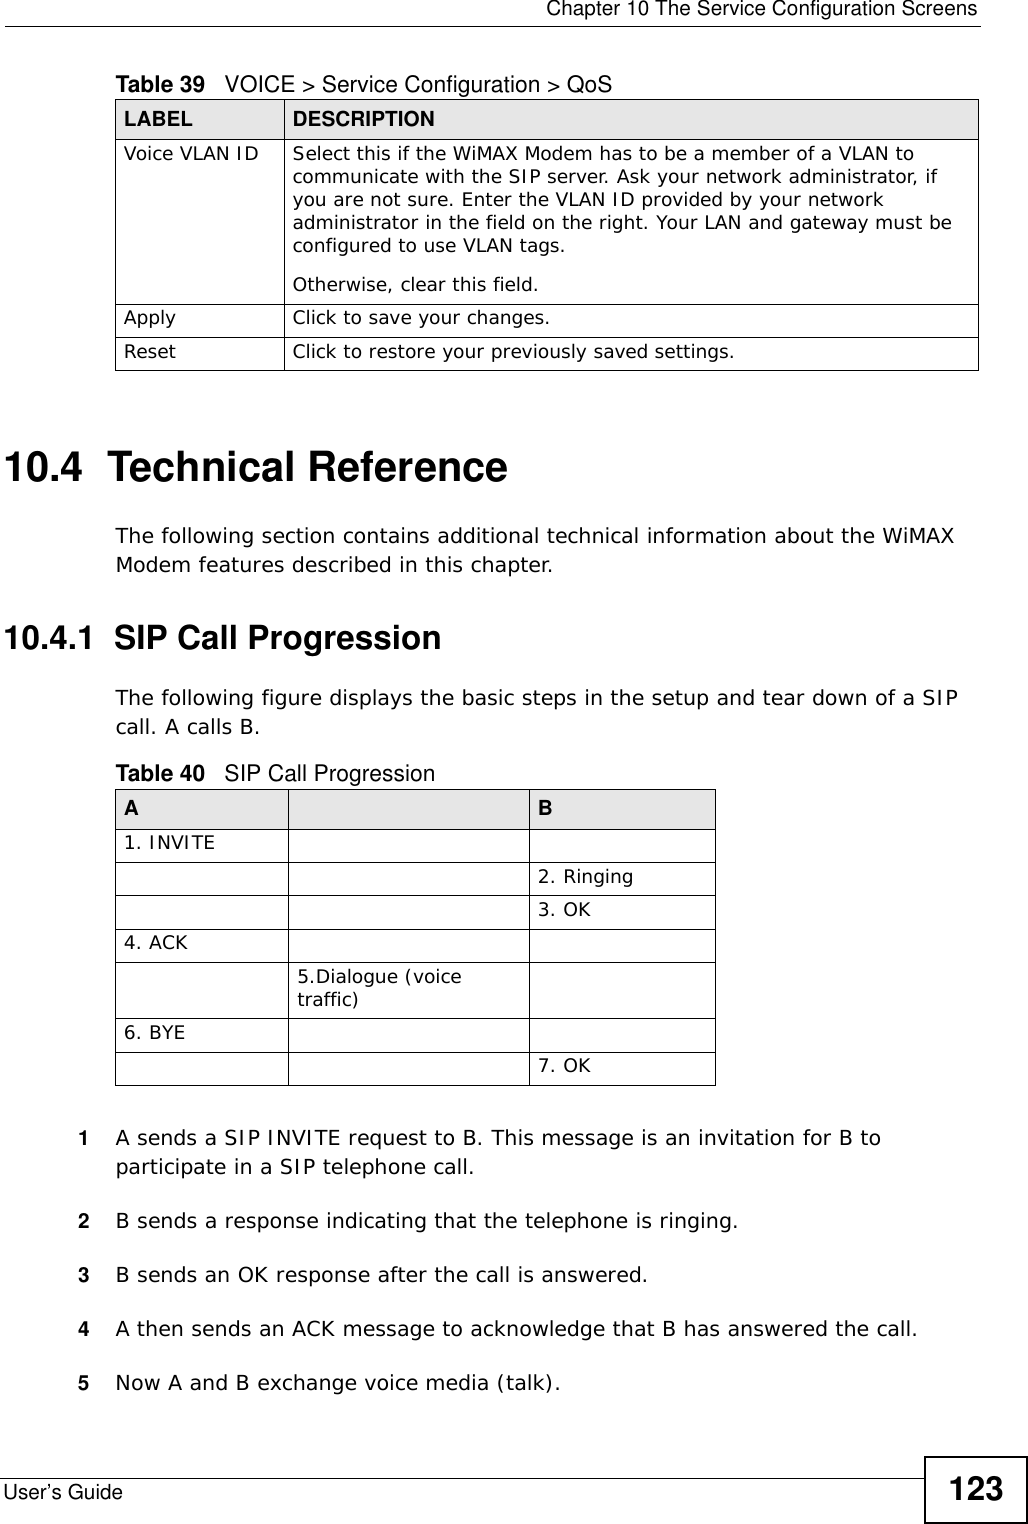  Chapter 10 The Service Configuration ScreensUser’s Guide 12310.4  Technical ReferenceThe following section contains additional technical information about the WiMAX Modem features described in this chapter.10.4.1  SIP Call ProgressionThe following figure displays the basic steps in the setup and tear down of a SIP call. A calls B. 1A sends a SIP INVITE request to B. This message is an invitation for B to participate in a SIP telephone call. 2B sends a response indicating that the telephone is ringing.3B sends an OK response after the call is answered. 4A then sends an ACK message to acknowledge that B has answered the call. 5Now A and B exchange voice media (talk). Voice VLAN ID Select this if the WiMAX Modem has to be a member of a VLAN to communicate with the SIP server. Ask your network administrator, if you are not sure. Enter the VLAN ID provided by your network administrator in the field on the right. Your LAN and gateway must be configured to use VLAN tags.Otherwise, clear this field.Apply Click to save your changes.Reset Click to restore your previously saved settings.Table 39   VOICE &gt; Service Configuration &gt; QoSLABEL DESCRIPTIONTable 40   SIP Call ProgressionA B1. INVITE2. Ringing3. OK4. ACK 5.Dialogue (voice traffic)6. BYE7. OK